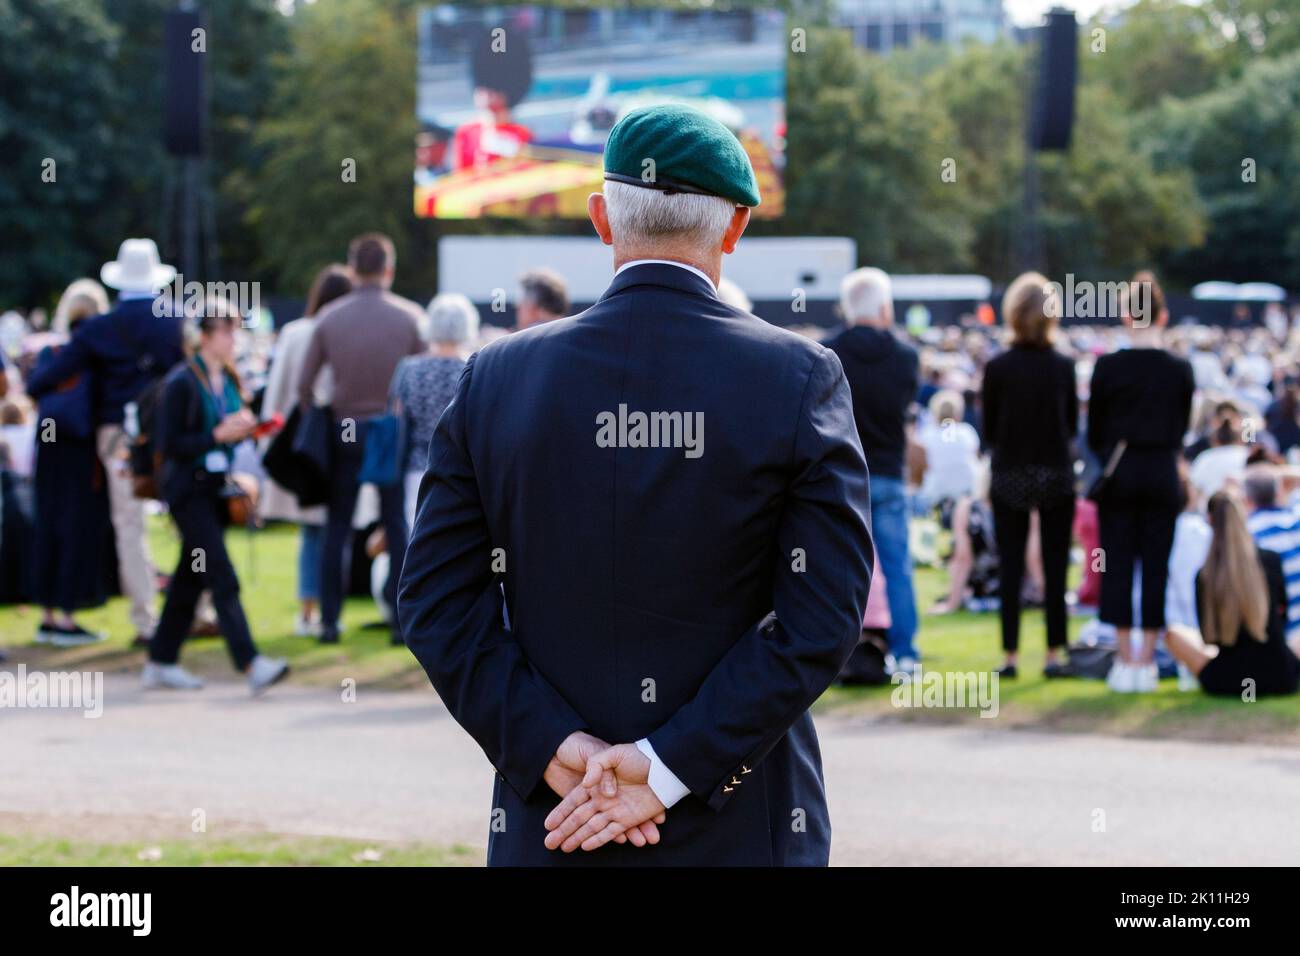 London, UK. 14th Sep, 2022. As crowds of people came to London to watch Her Majesty the Queen's coffin being transported to the Palace of Westminster, an ex serviceman is pictured watching the event on large video screens in Hyde Park, London. Credit: Lynchpics/Alamy Live News Stock Photo